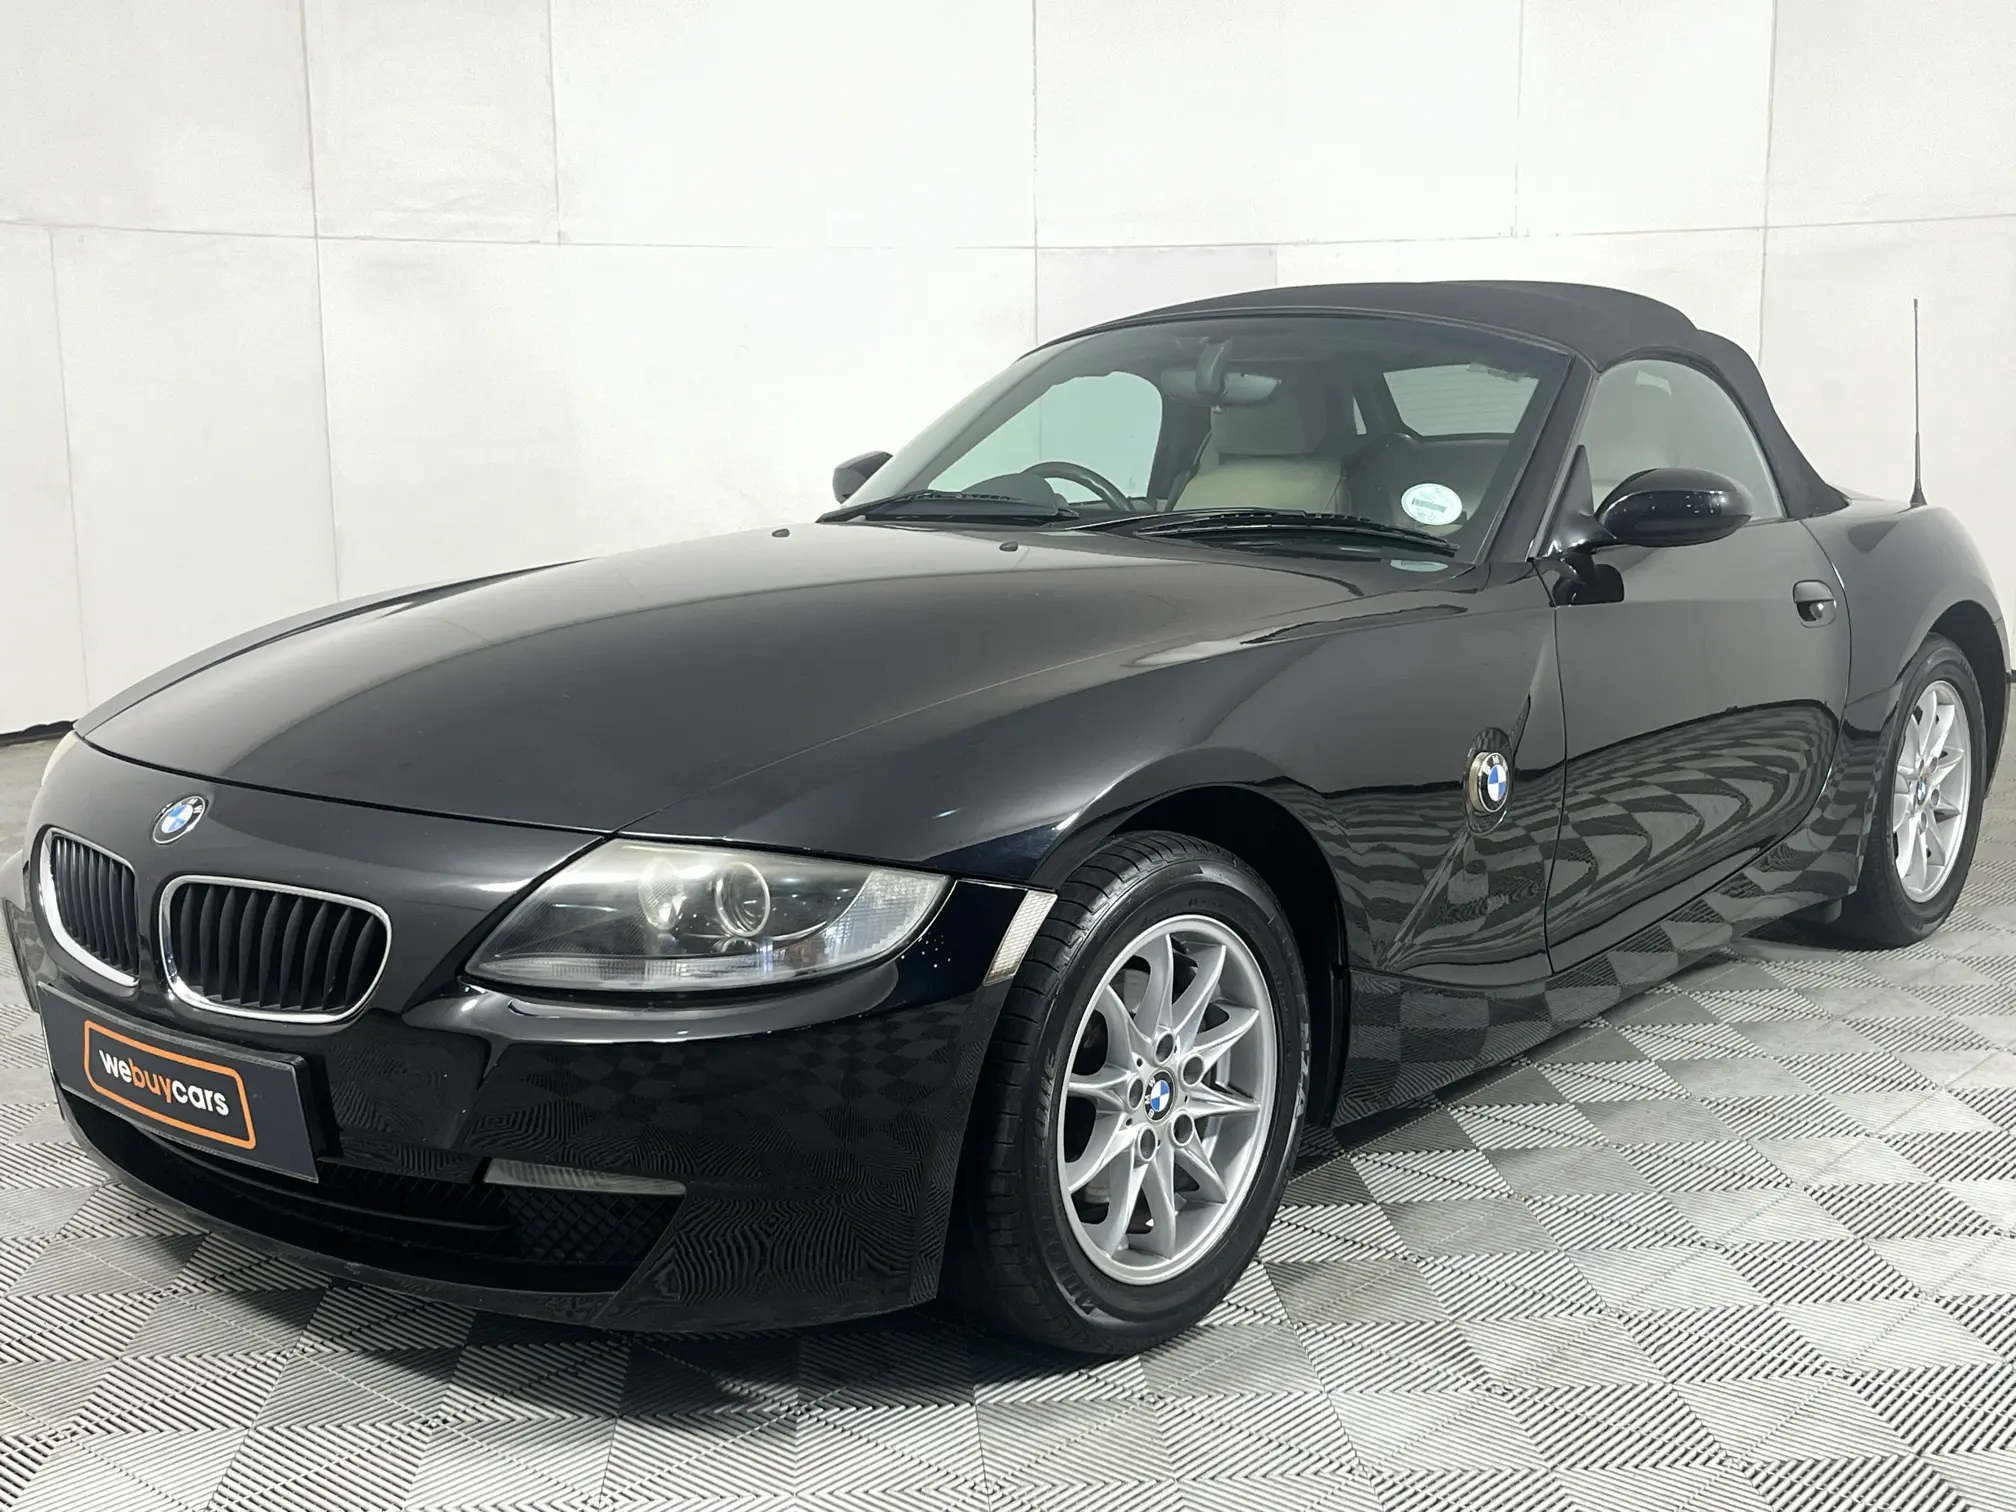 2006 BMW Z4 2.0i Exclusive Roadster (E85)